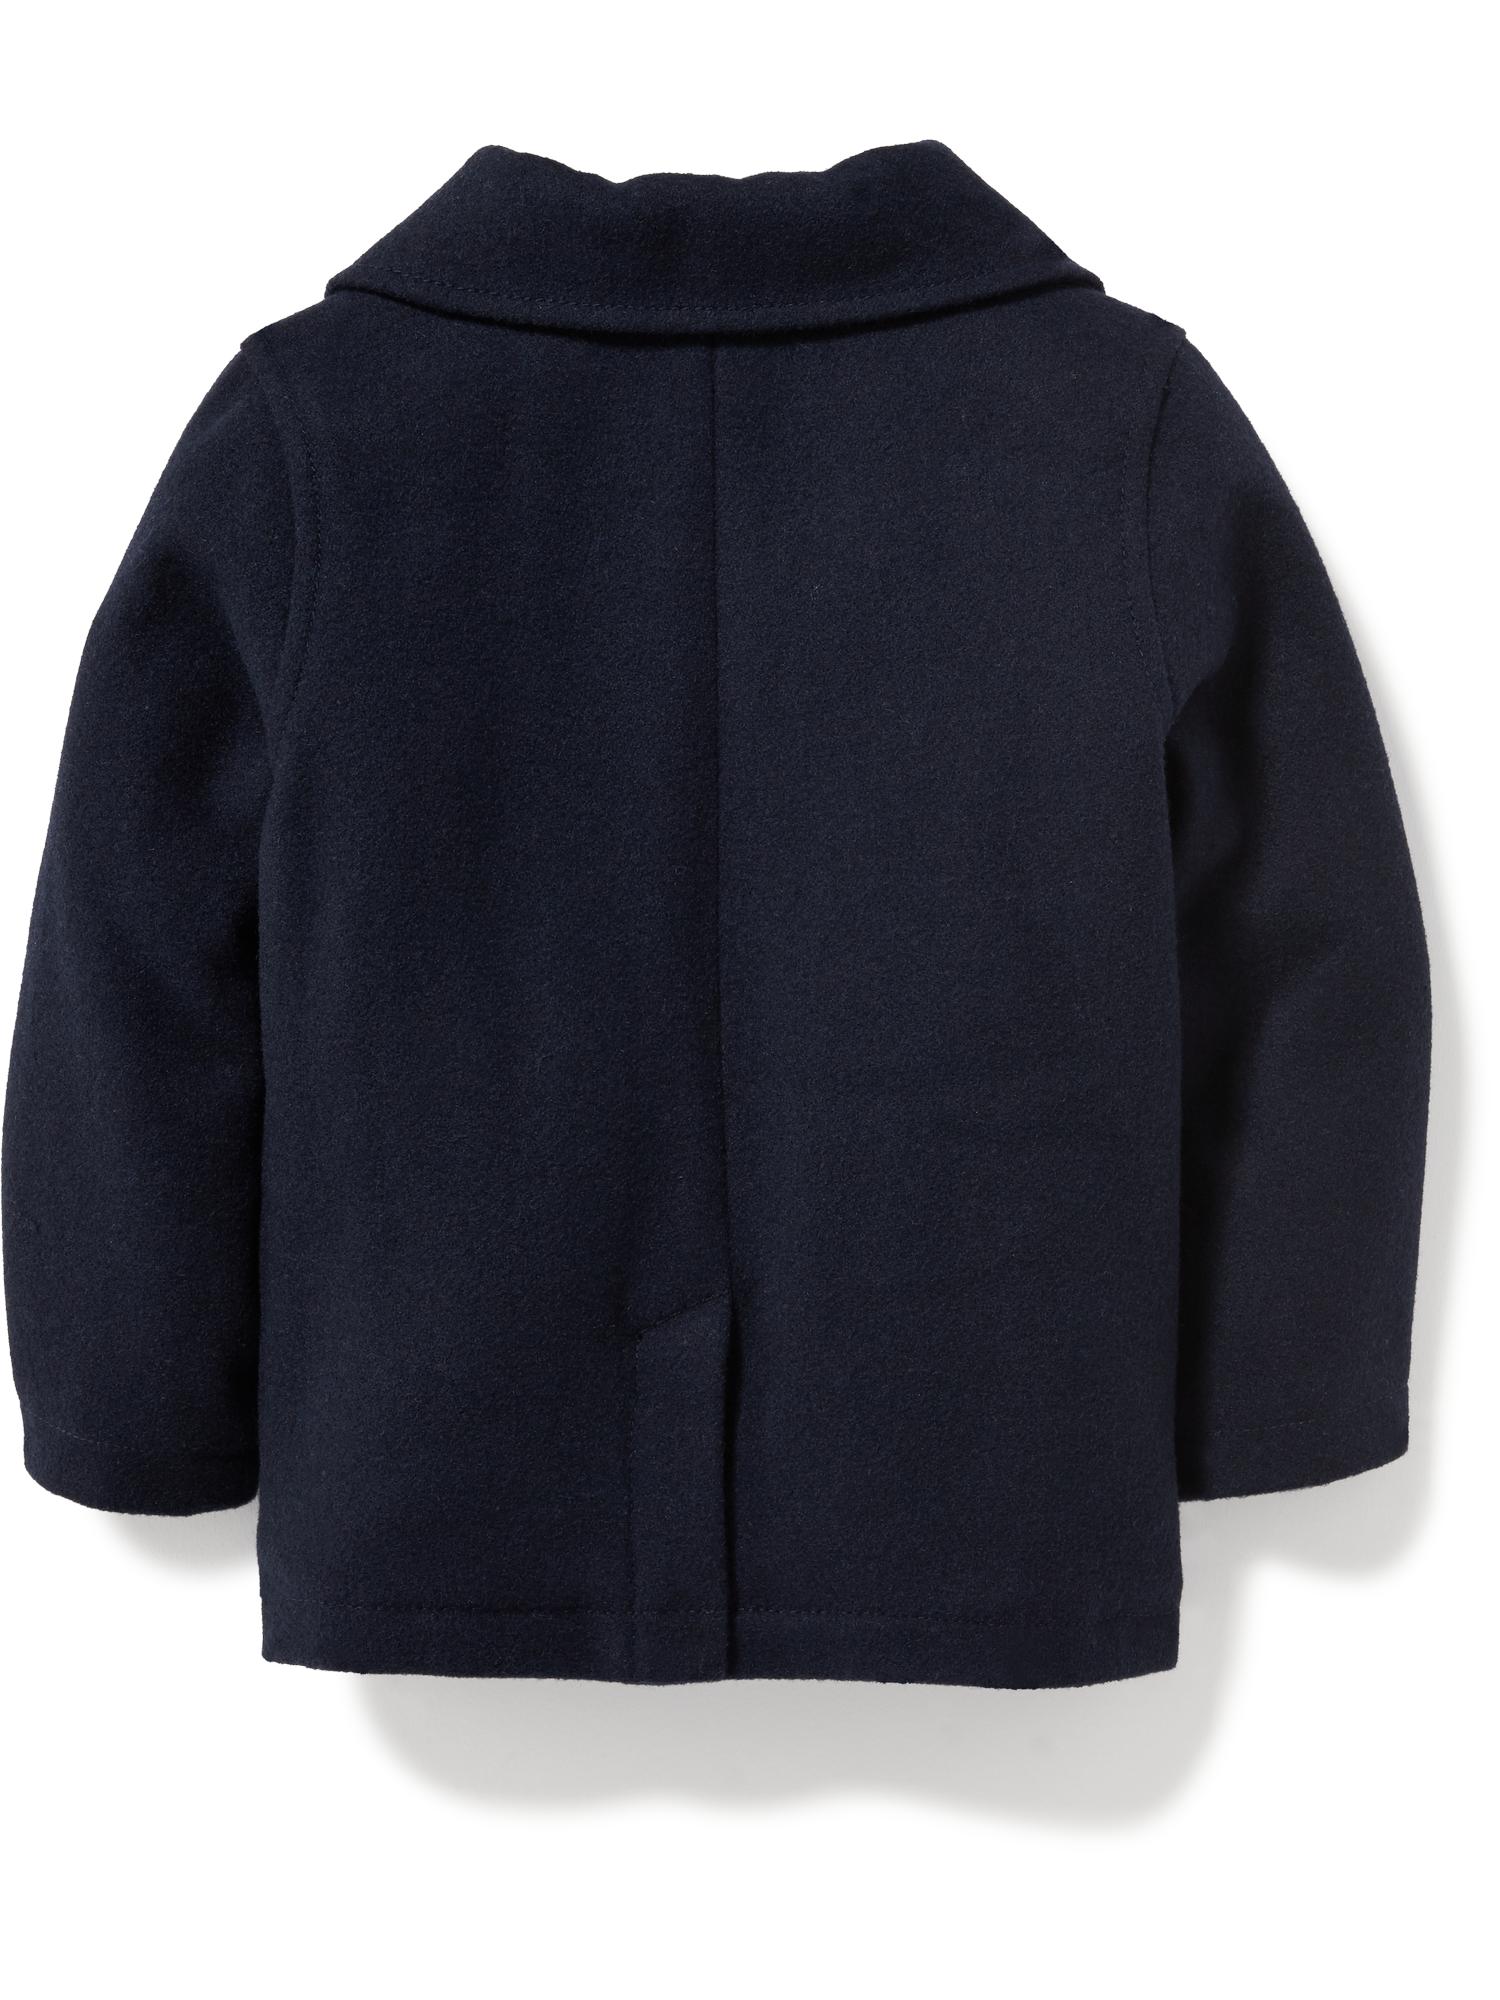 Classic Wool-Blend Peacoat for Toddler Boys | Old Navy